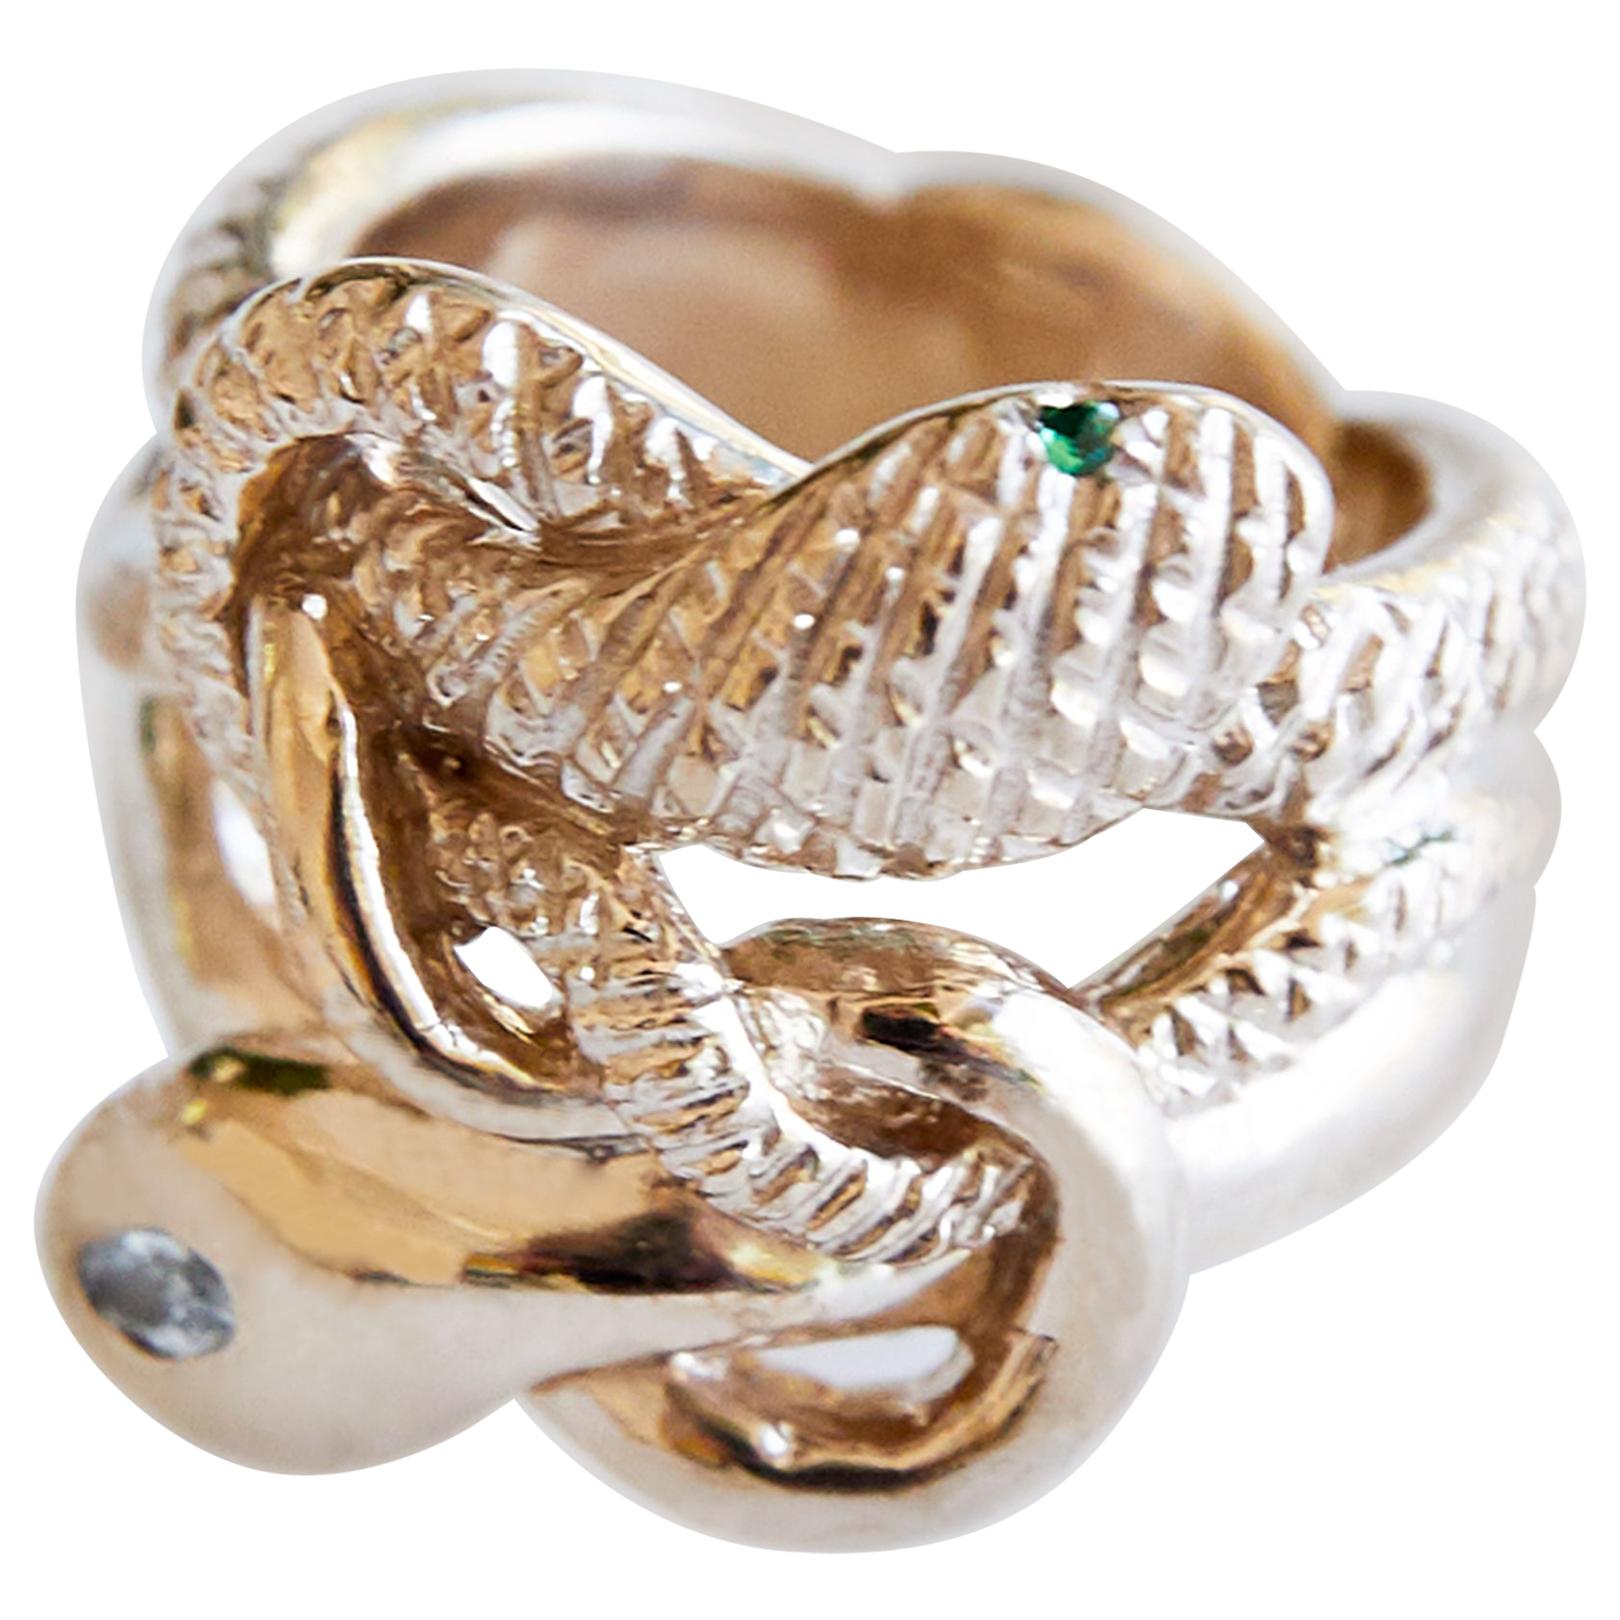 White Diamond Marquis Emerald Ruby Eyes 14k Yellow Gold Snake Cocktail Ring Victorian Style  J Dauphin

This is our best seller Snake ring, Can be made in yellow or white gold.
1 Marquis Cut White Diamond 2 pcs Emerald as eyes and 2 pcs Ruby as eyes